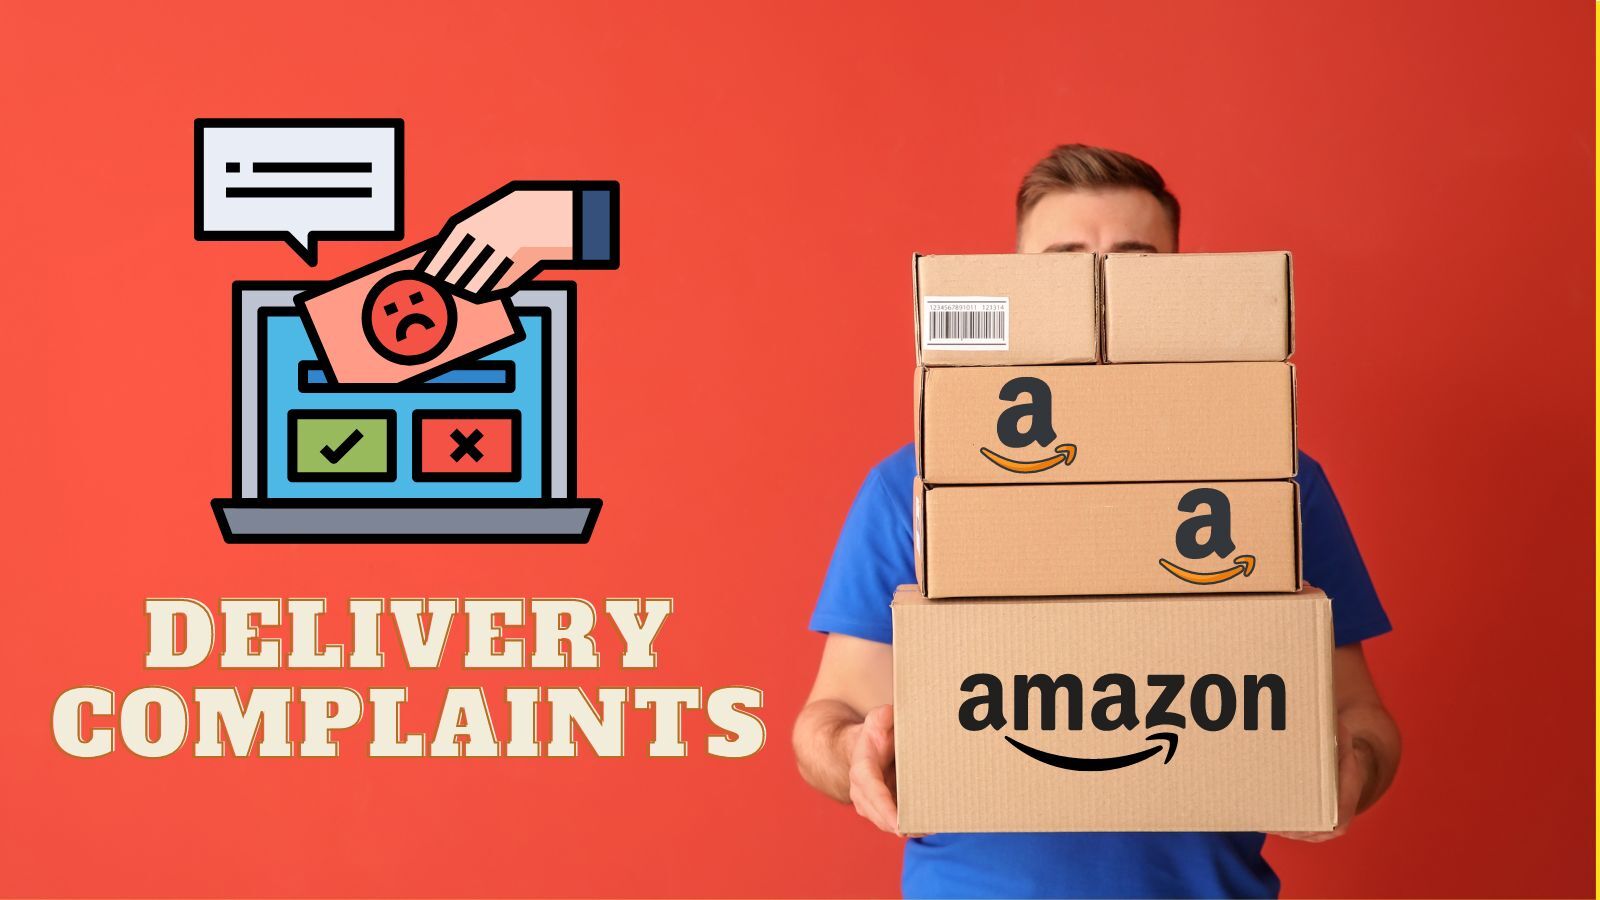 Amazon Delivery Complaints: How to Make It, and Why It Is Late?